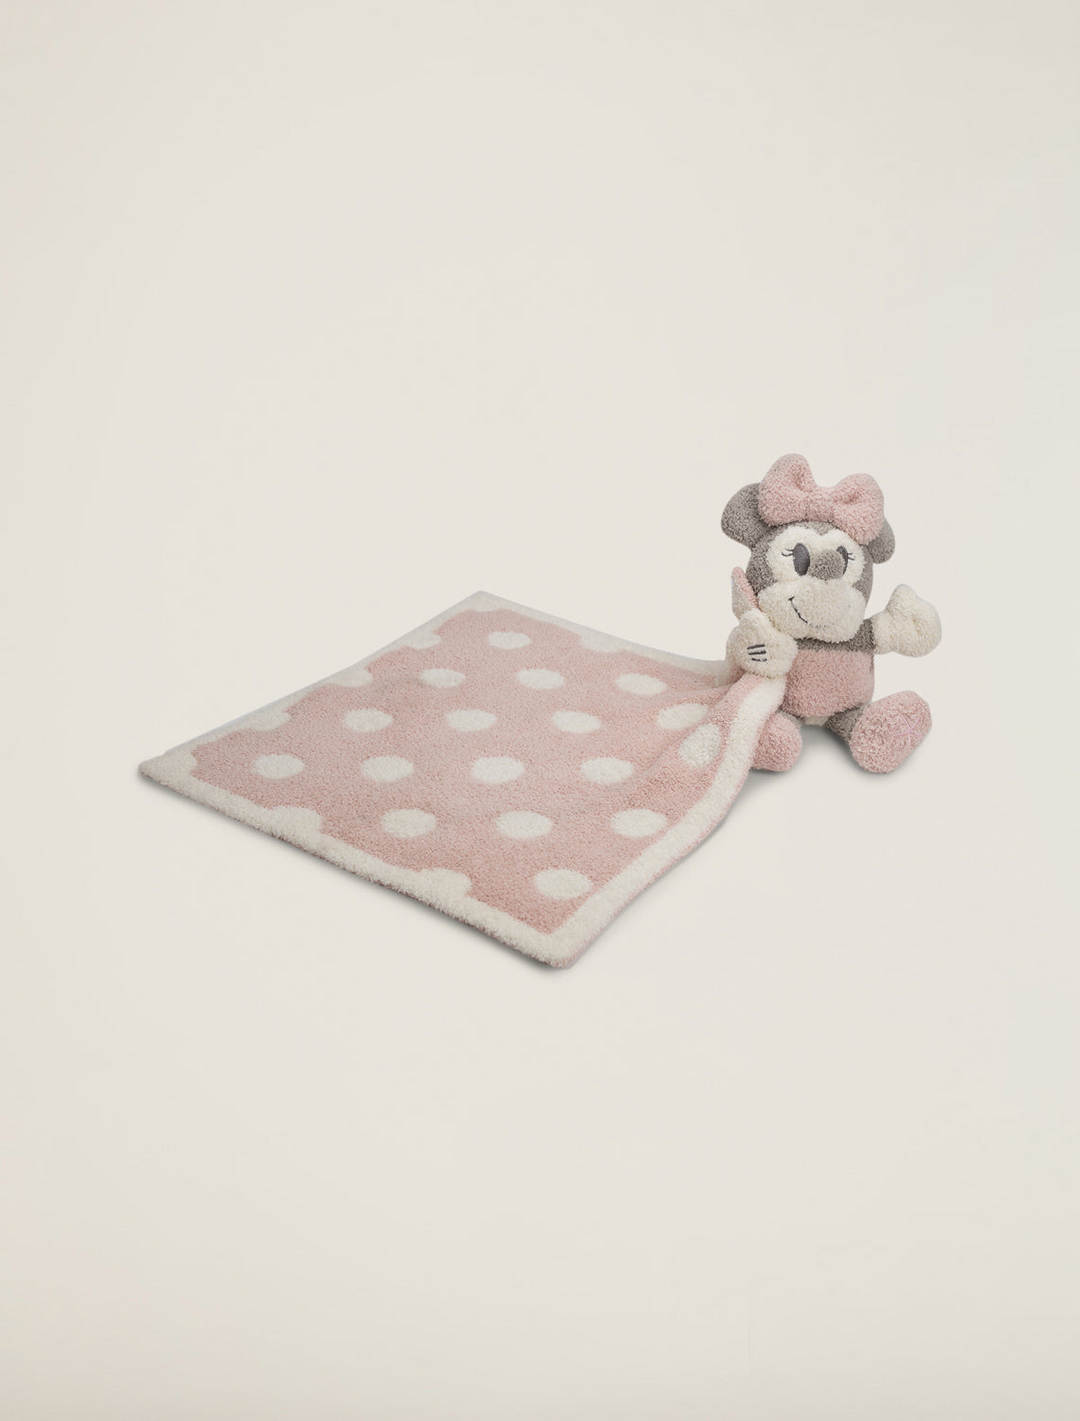 COZY CHIC MINNIE MOUSE BUDDY BLANKET-DUSTY ROSE - Kingfisher Road - Online Boutique